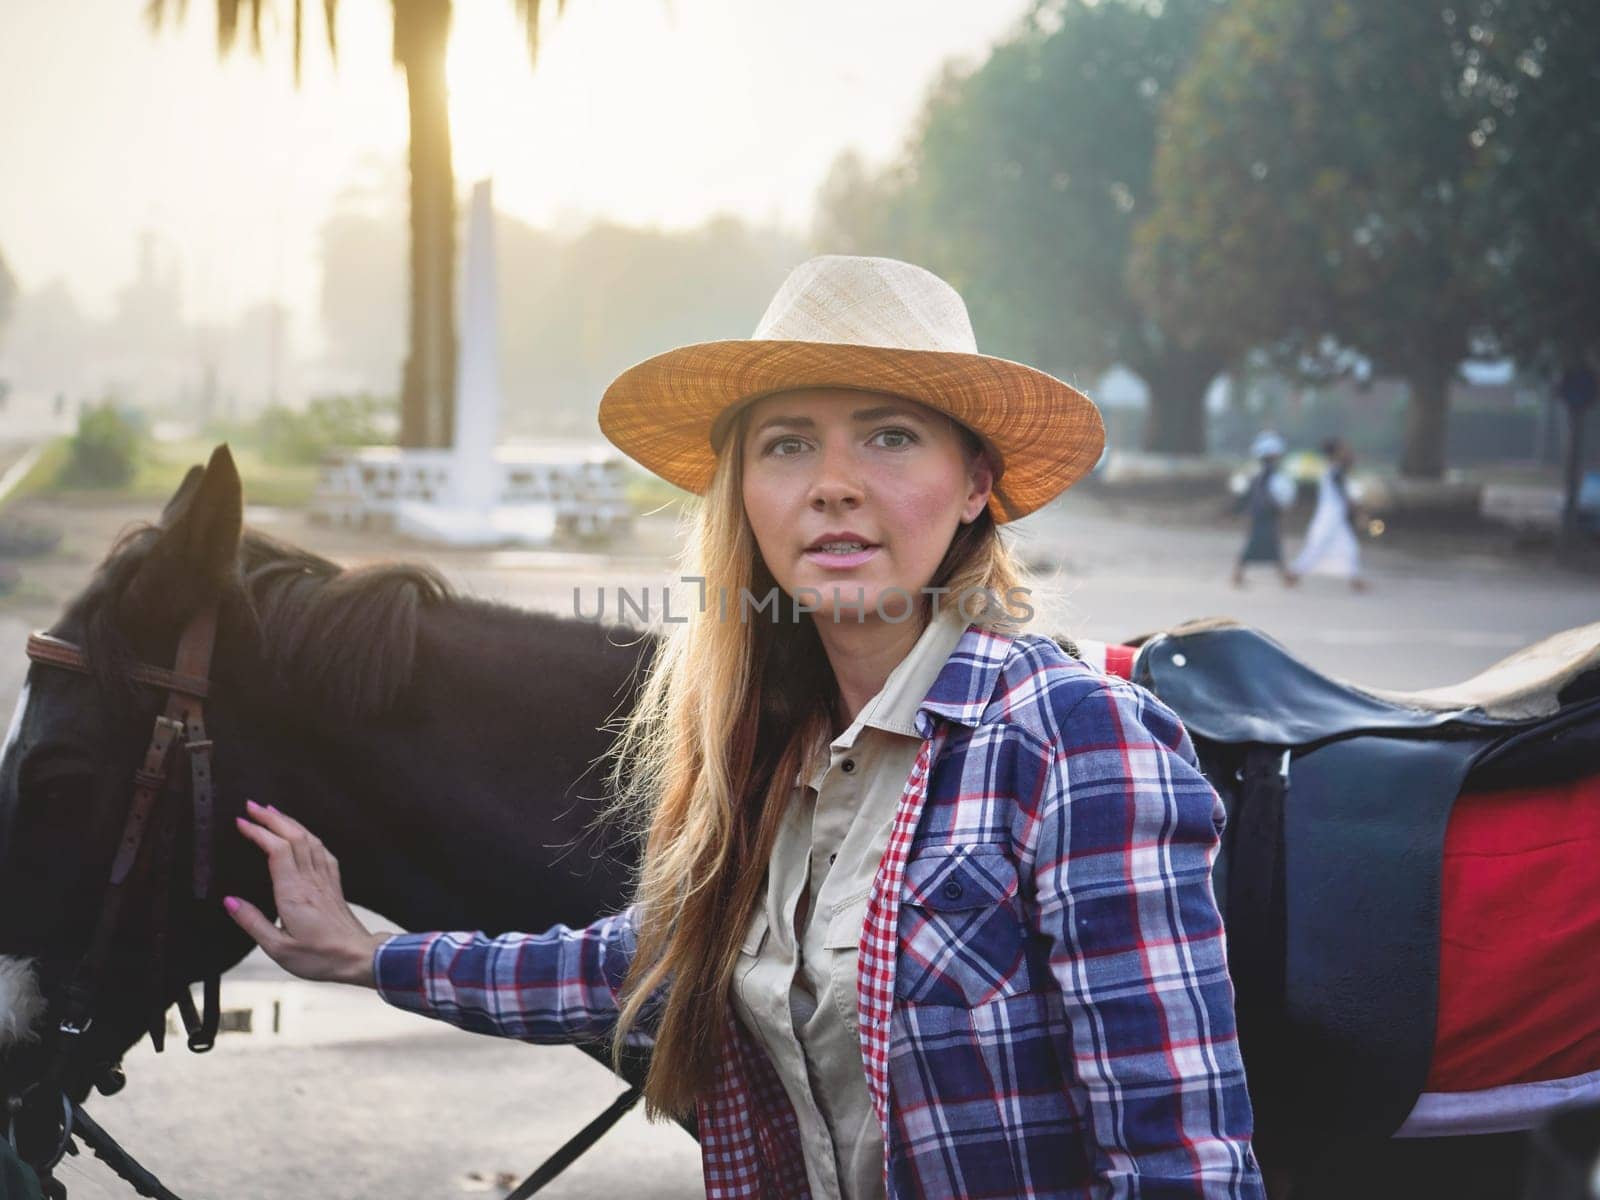 Candid portrait of young woman in stray hat and tartan shirt touching her black horse behind, ready for morning ride, blurred town in background